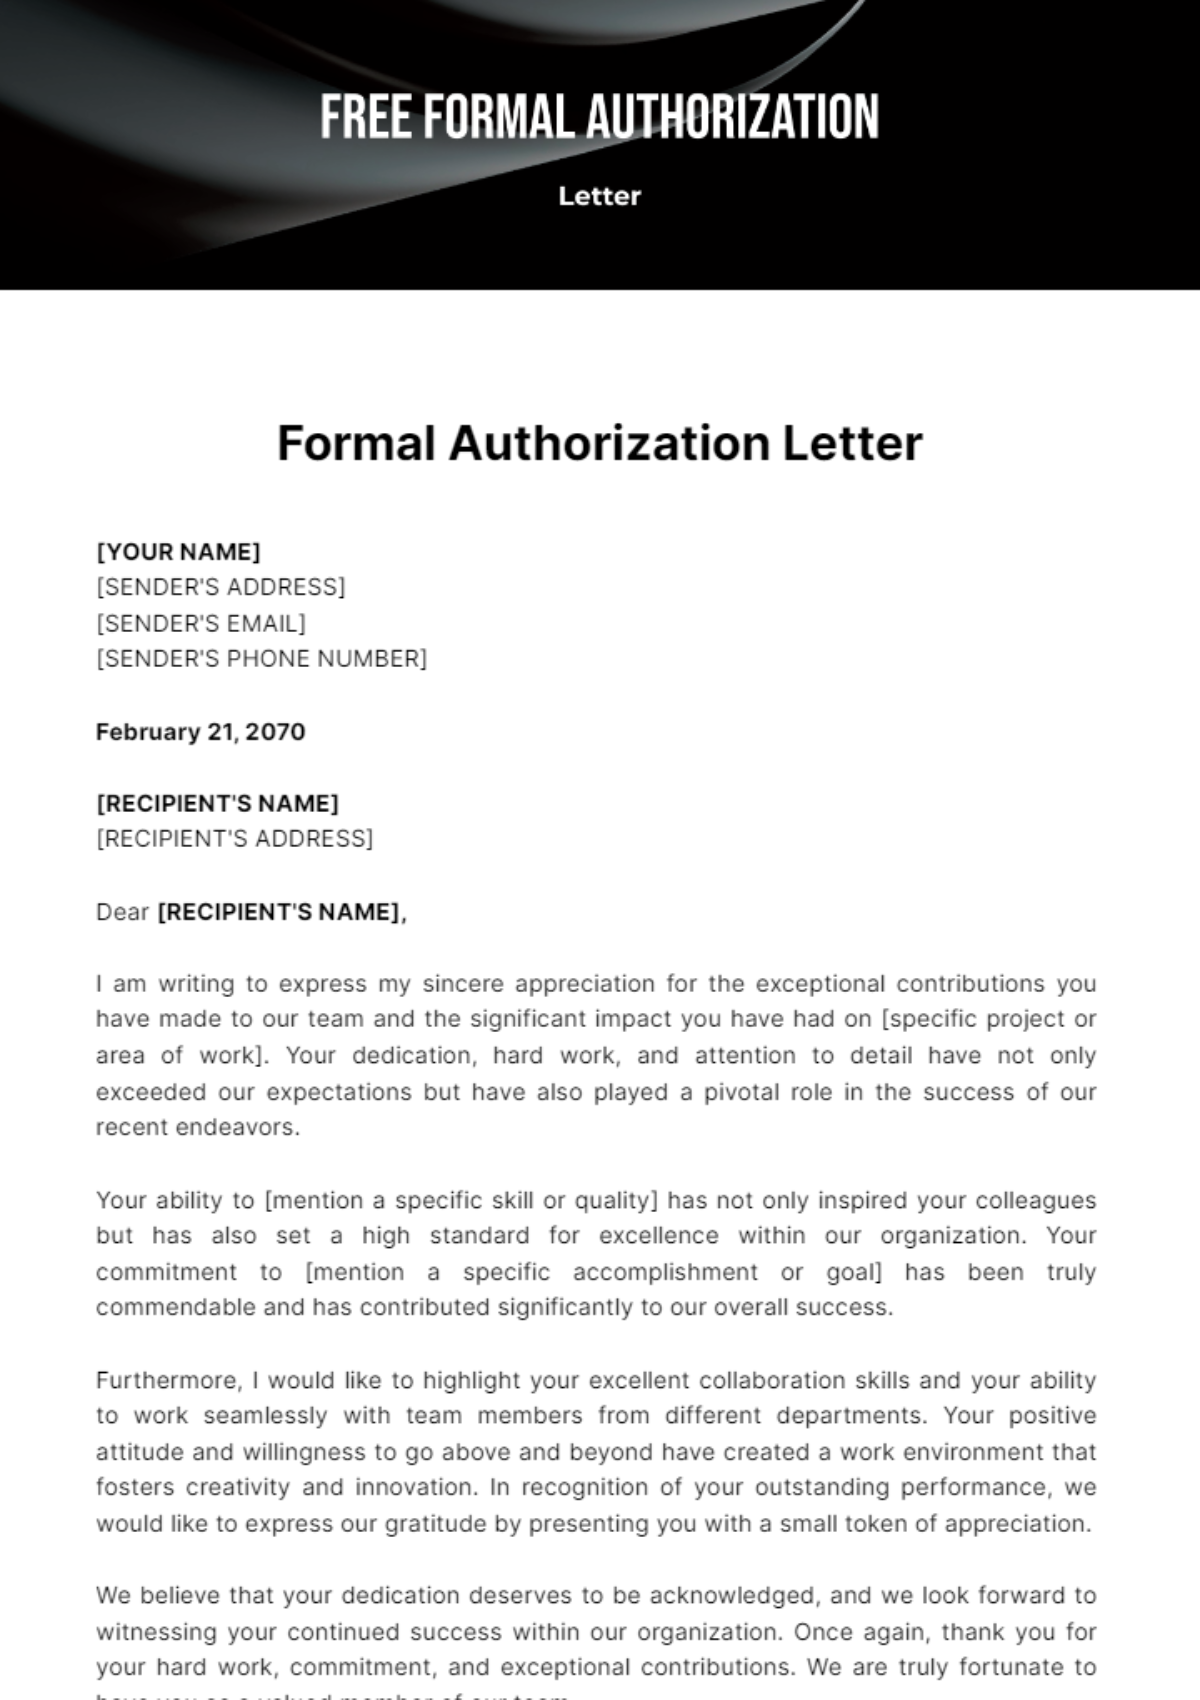 Free Formal Authorization Letter Template